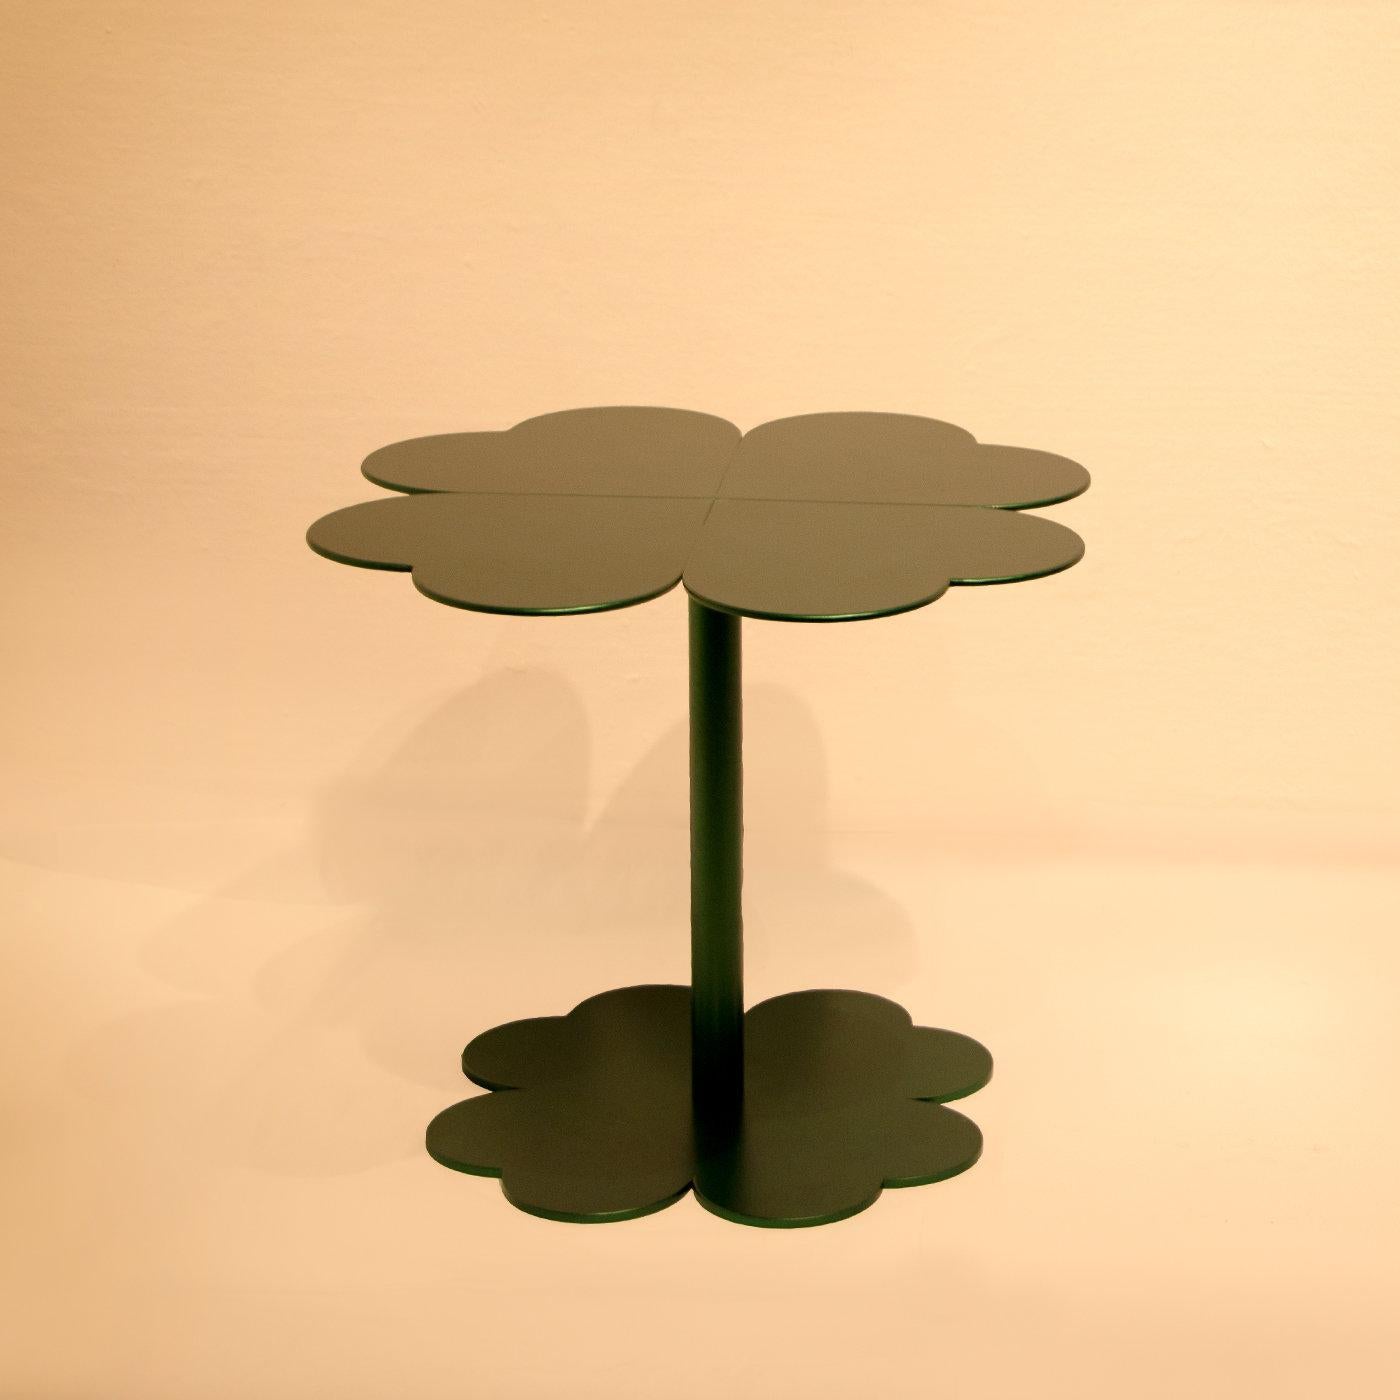 This original coffee table belongs to a series of furnishing pieces designed by Giulia Maria Ligresti that combine artistic flair and artisan quality. Handcrafted of iron with a four-leaf clover top and base in a vibrant green finish, this